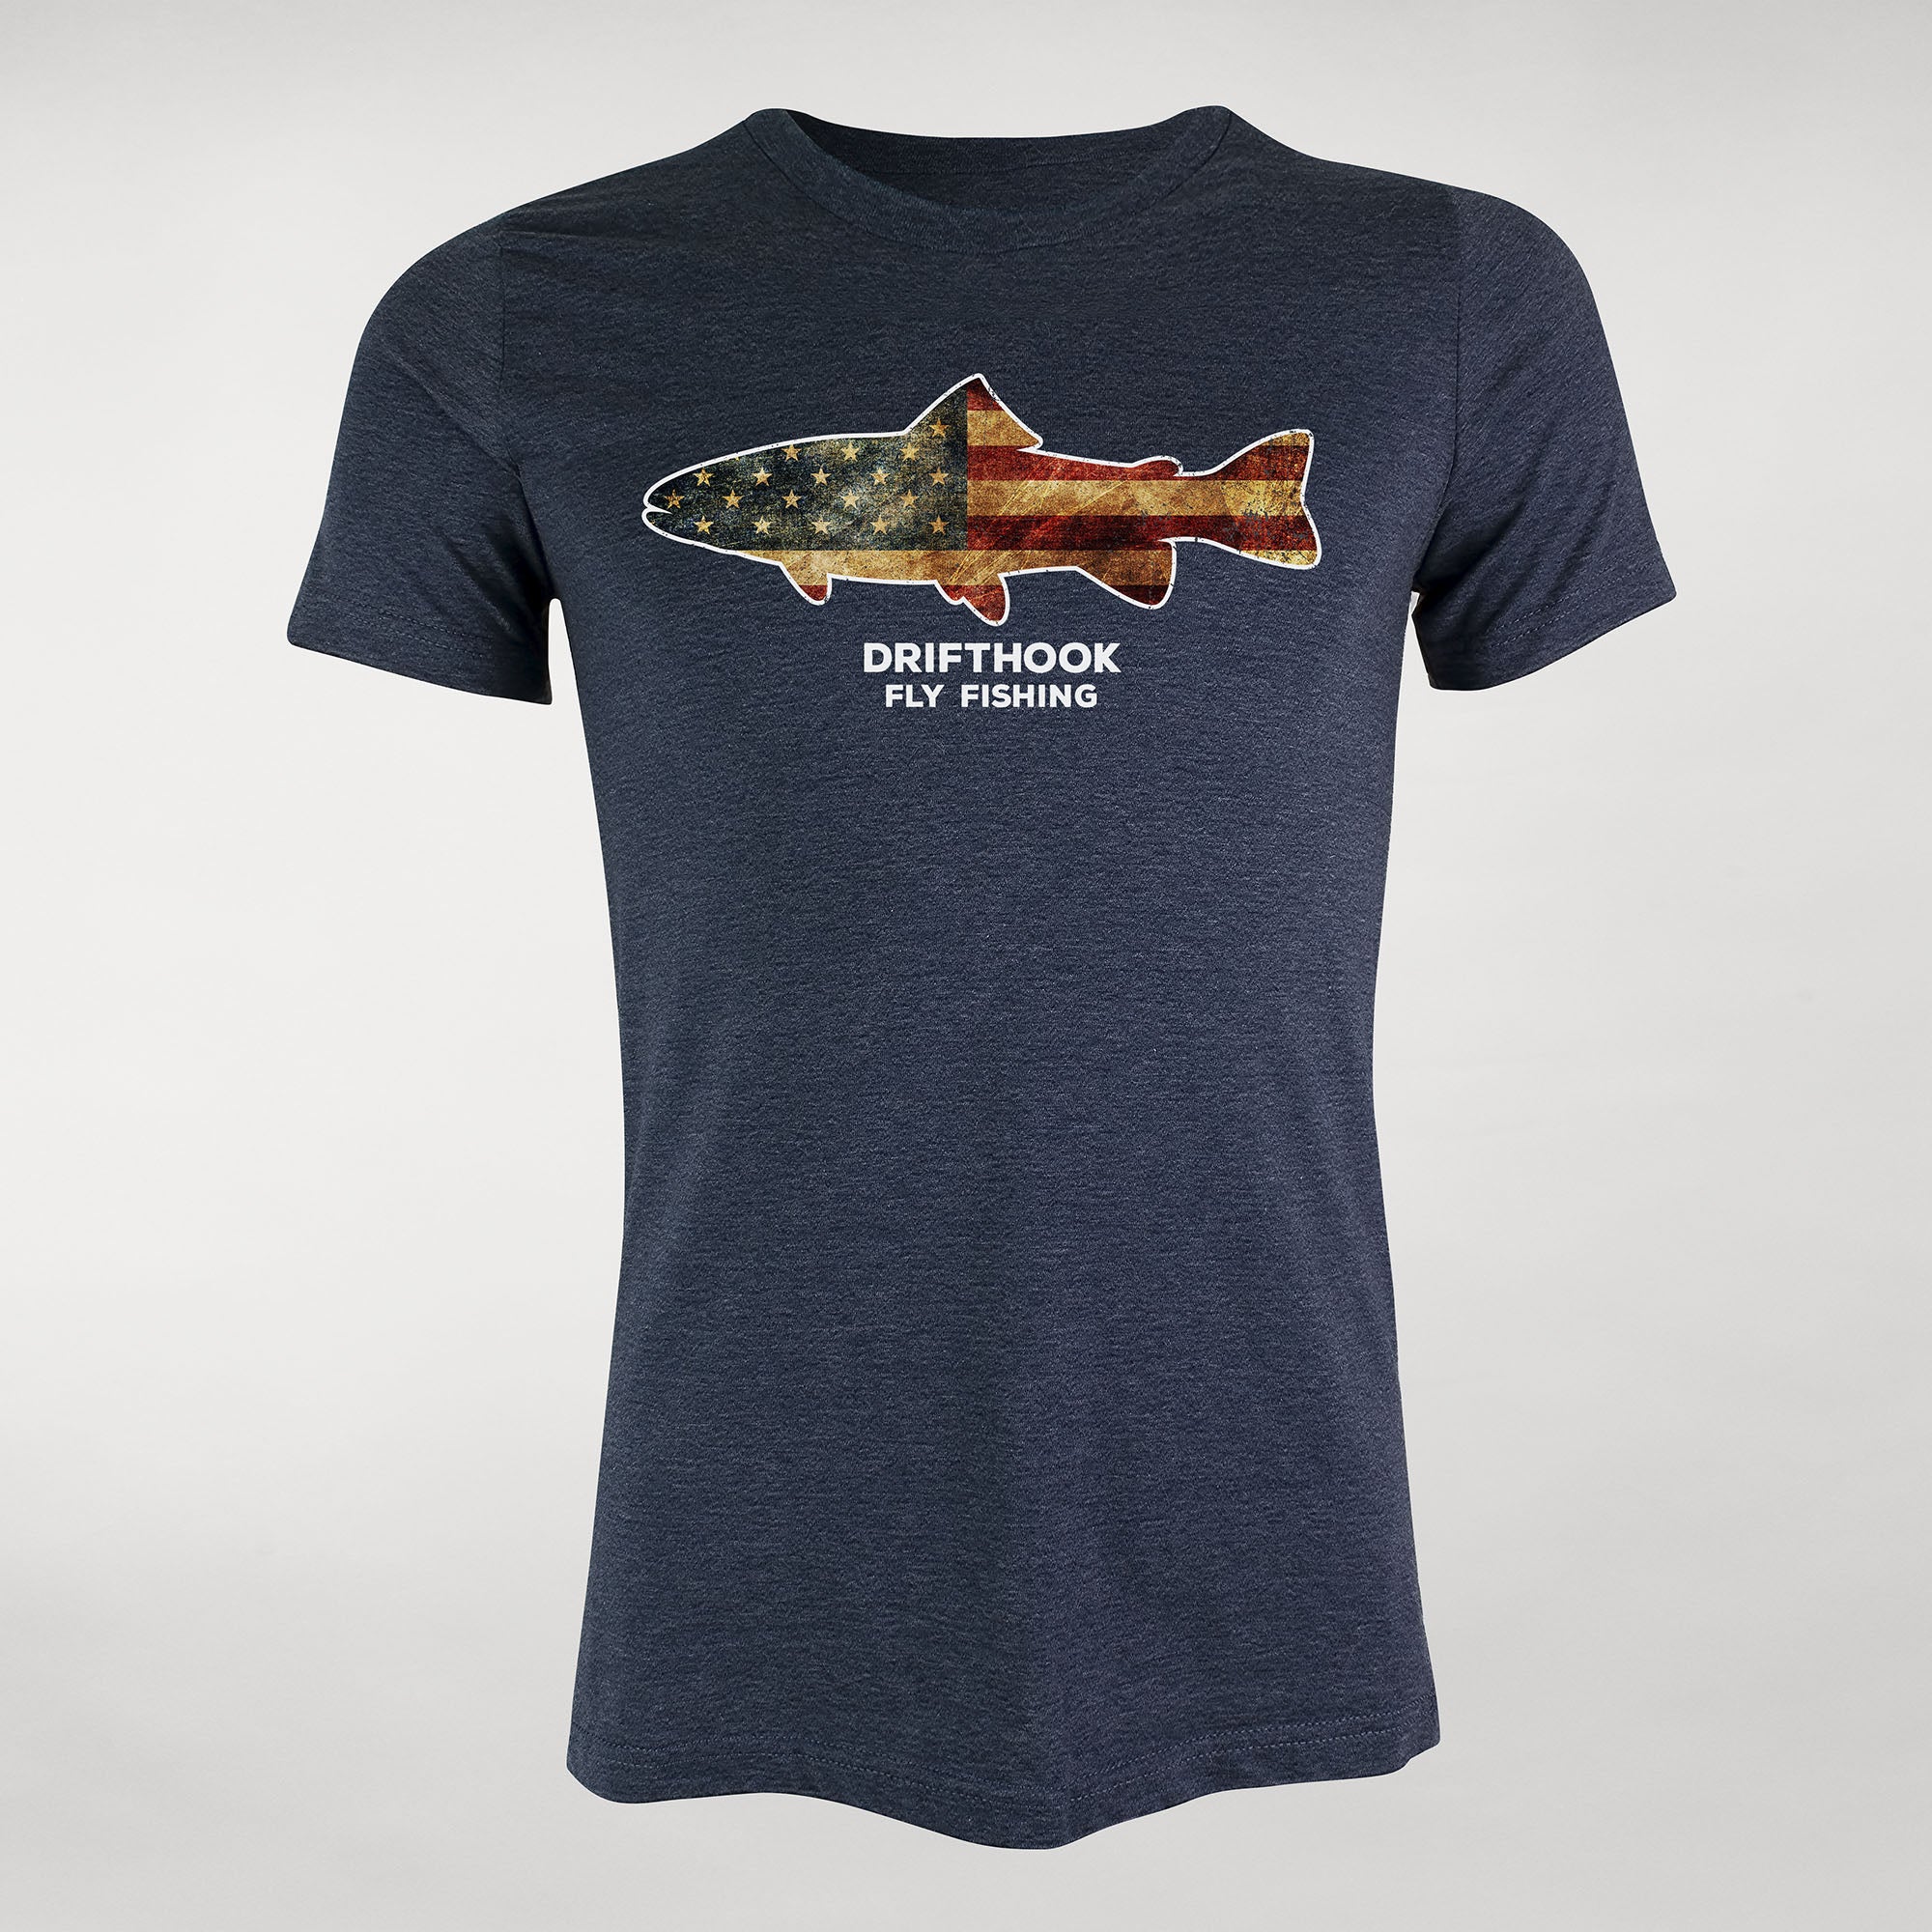 Buy Affordable Fly Fishing Shirt Online (Exclusive Design) XL